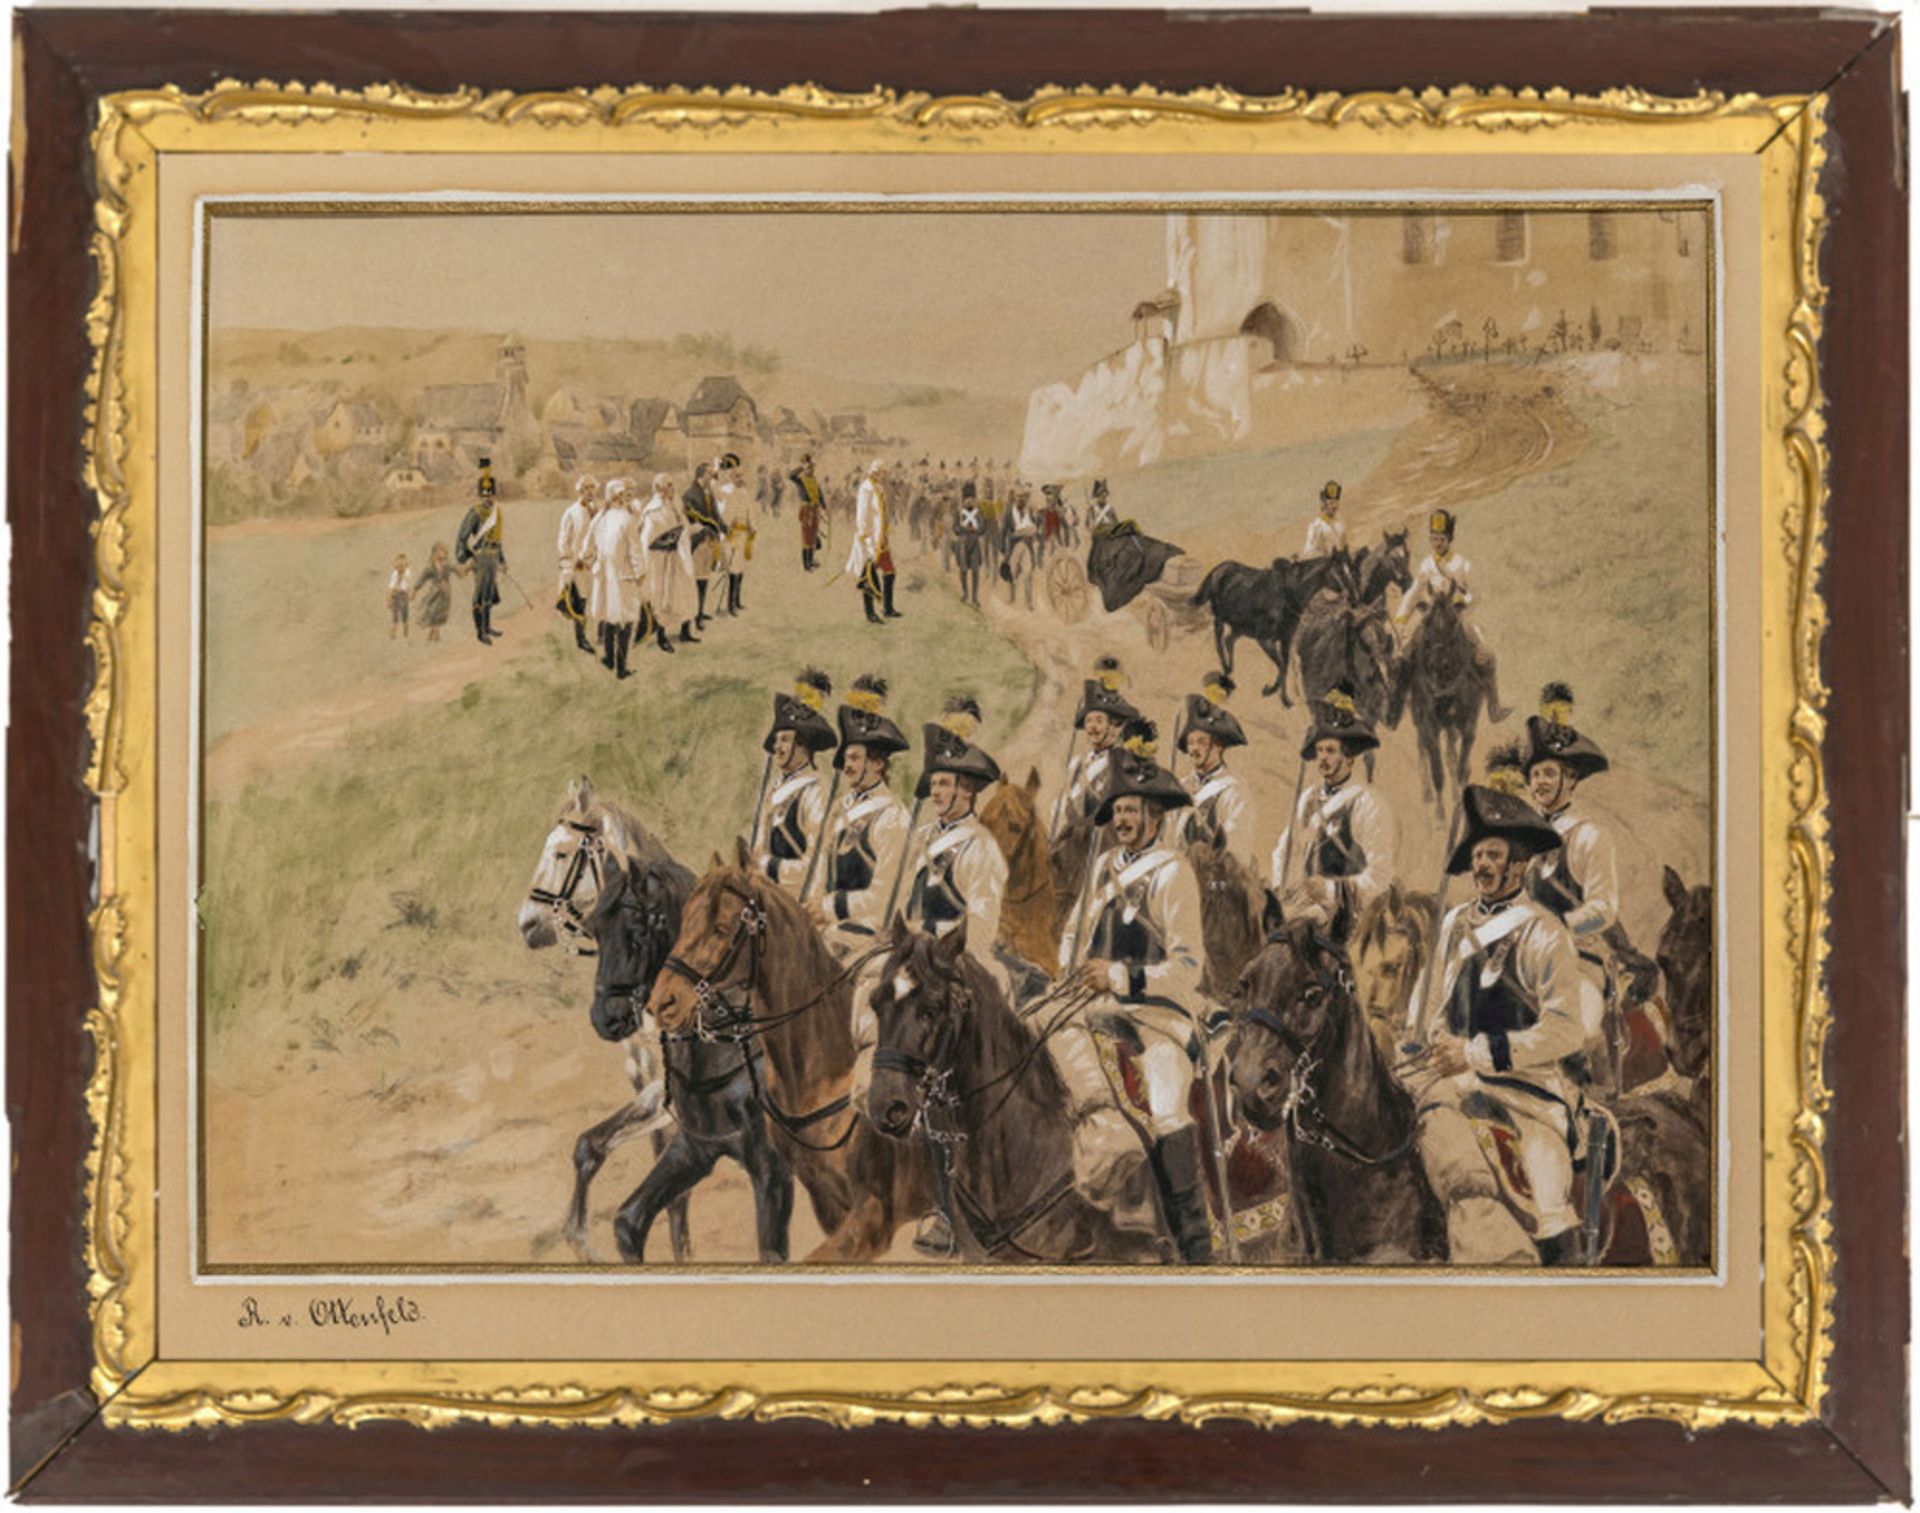 Archduke Charles conveys the body of General Marceau to the French forward posts - Image 3 of 4